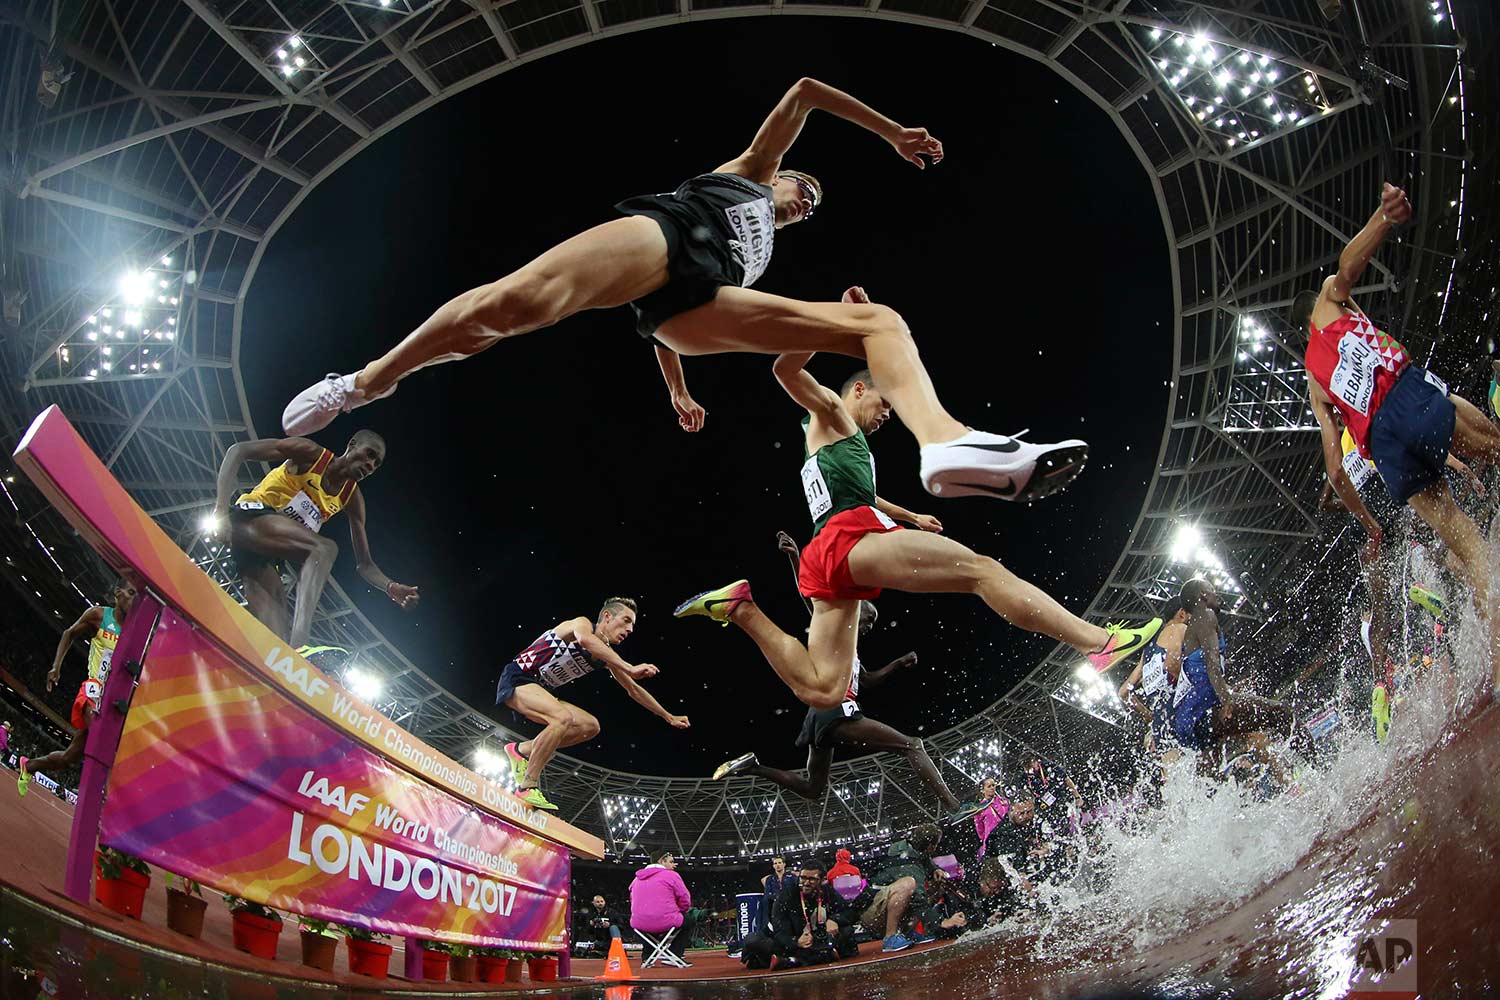  In this Tuesday, Aug. 8, 2017 photo, athletes compete in the men's 3000-meter steeplechase final during the World Athletics Championships in London. (AP Photo/Matthias Schrader) 